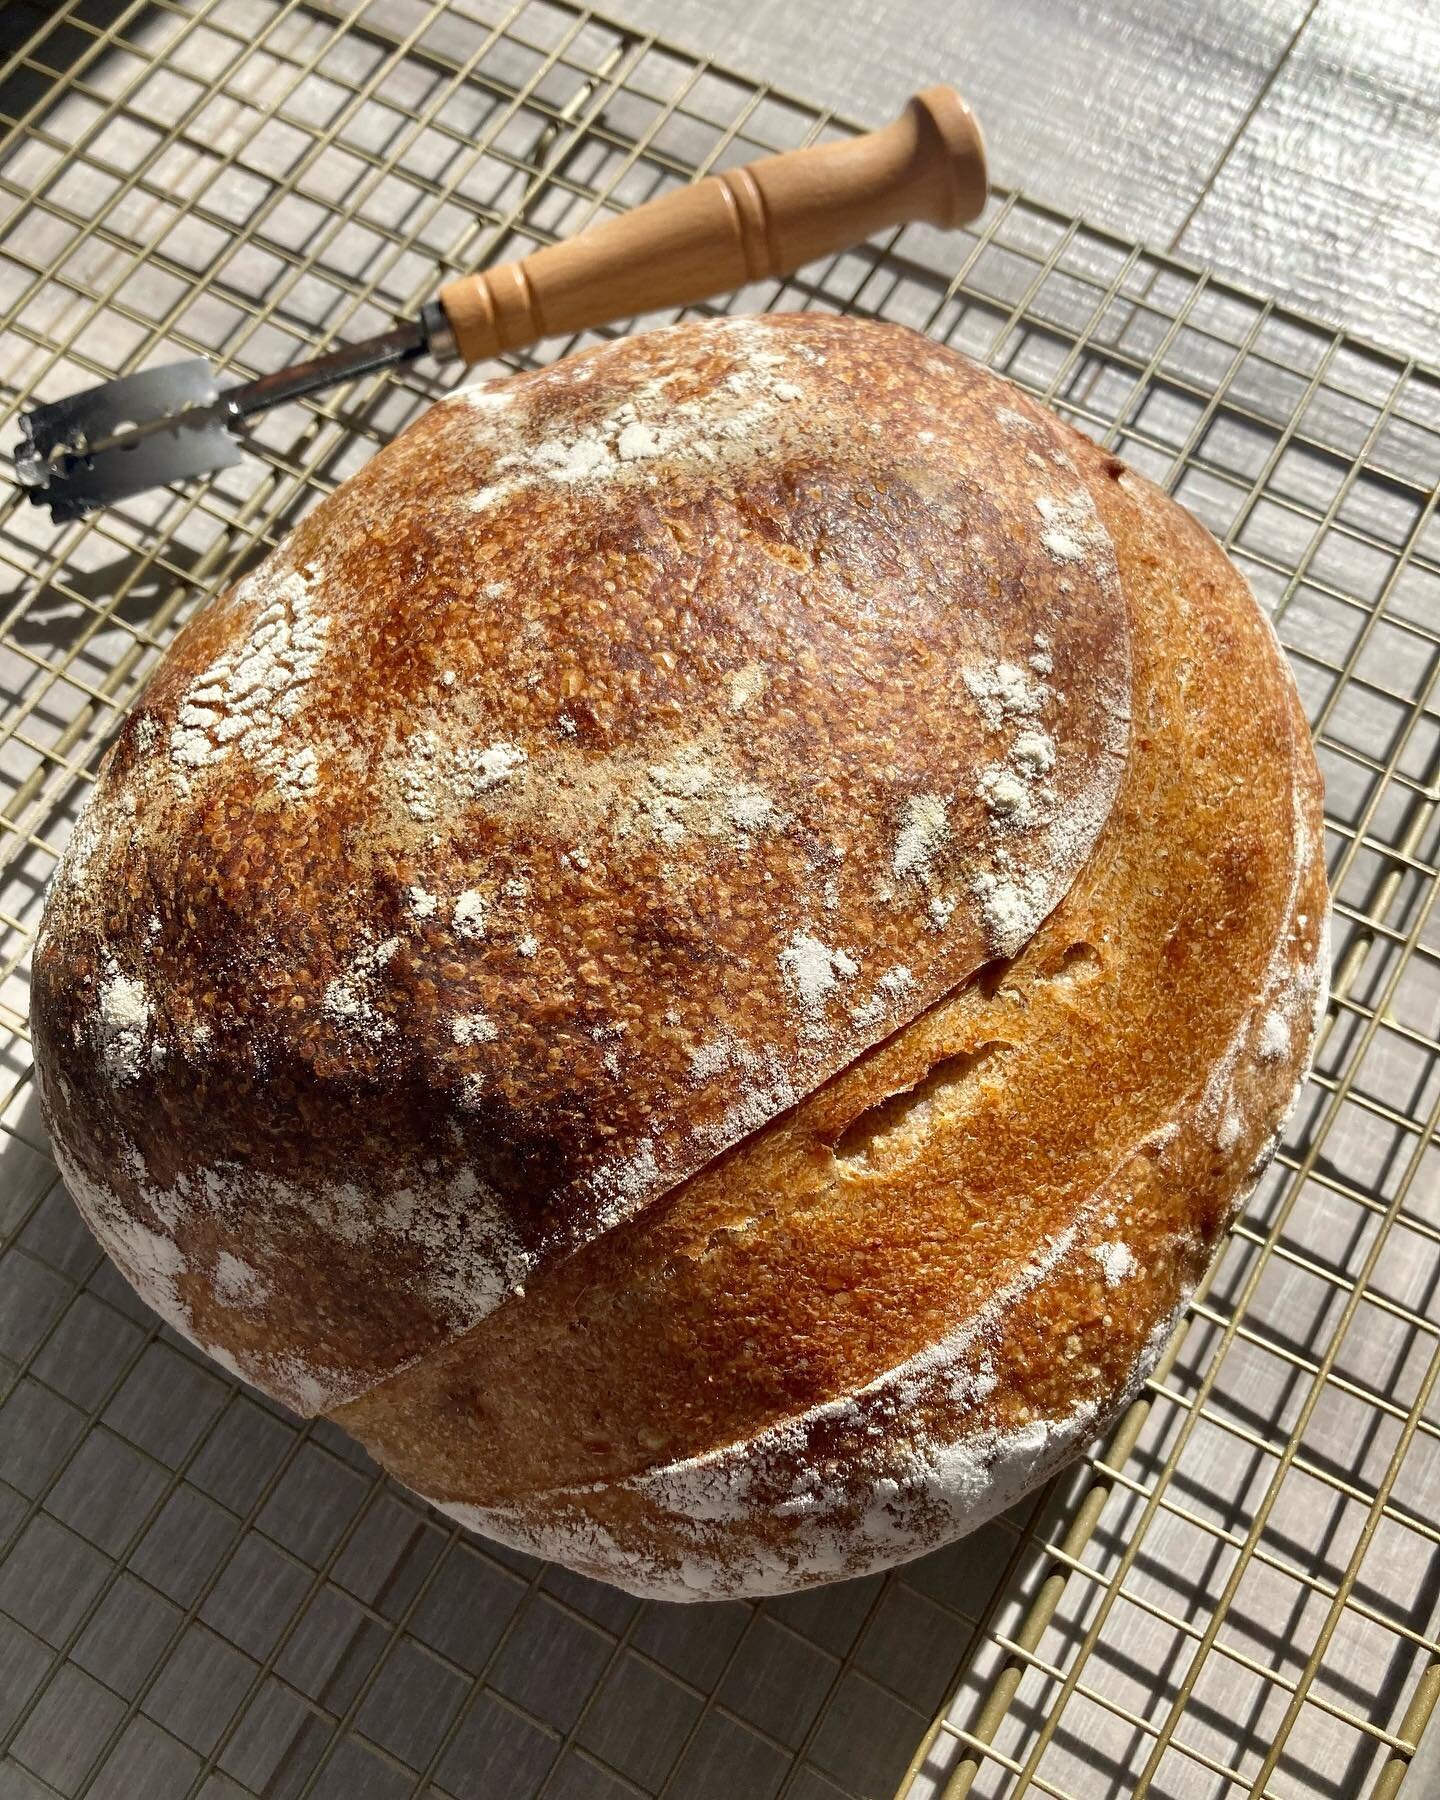 Baby&rsquo;s first sourdough 🥺

Definitely needs some work but proud of how it turned out and the taste was 10/10 😍

We made our own starter from scratch that my husband kept alive so this baby is thanks to him ❤️

It been a process and we&rsquo;ve